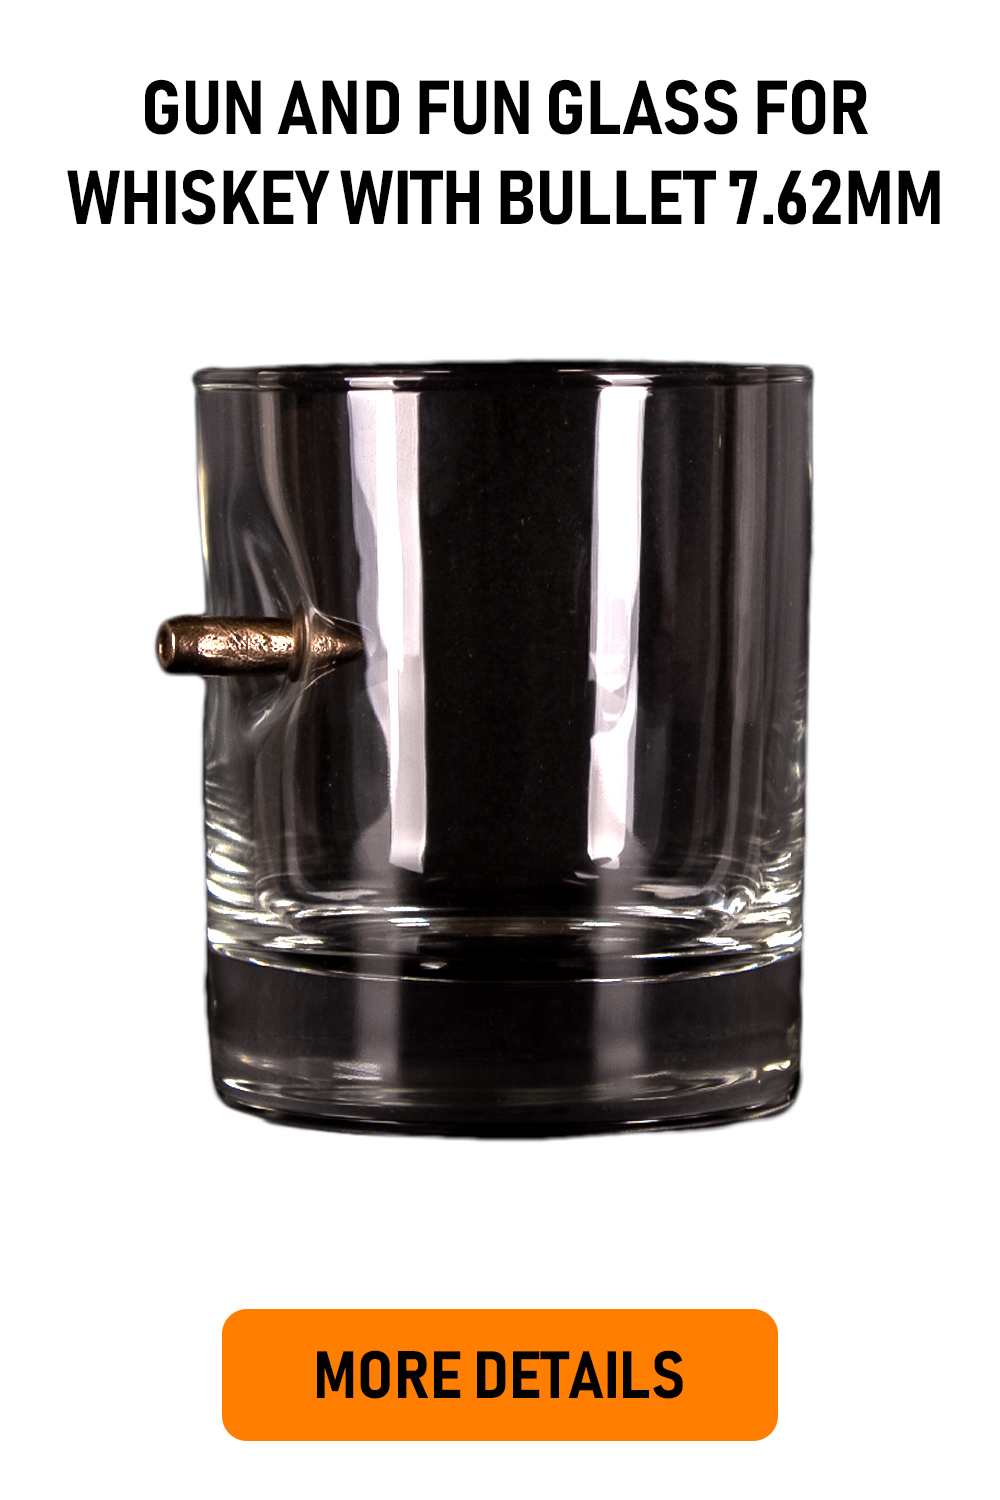 Gun and Fun Glass for Whiskey with Bullet 7.62mm